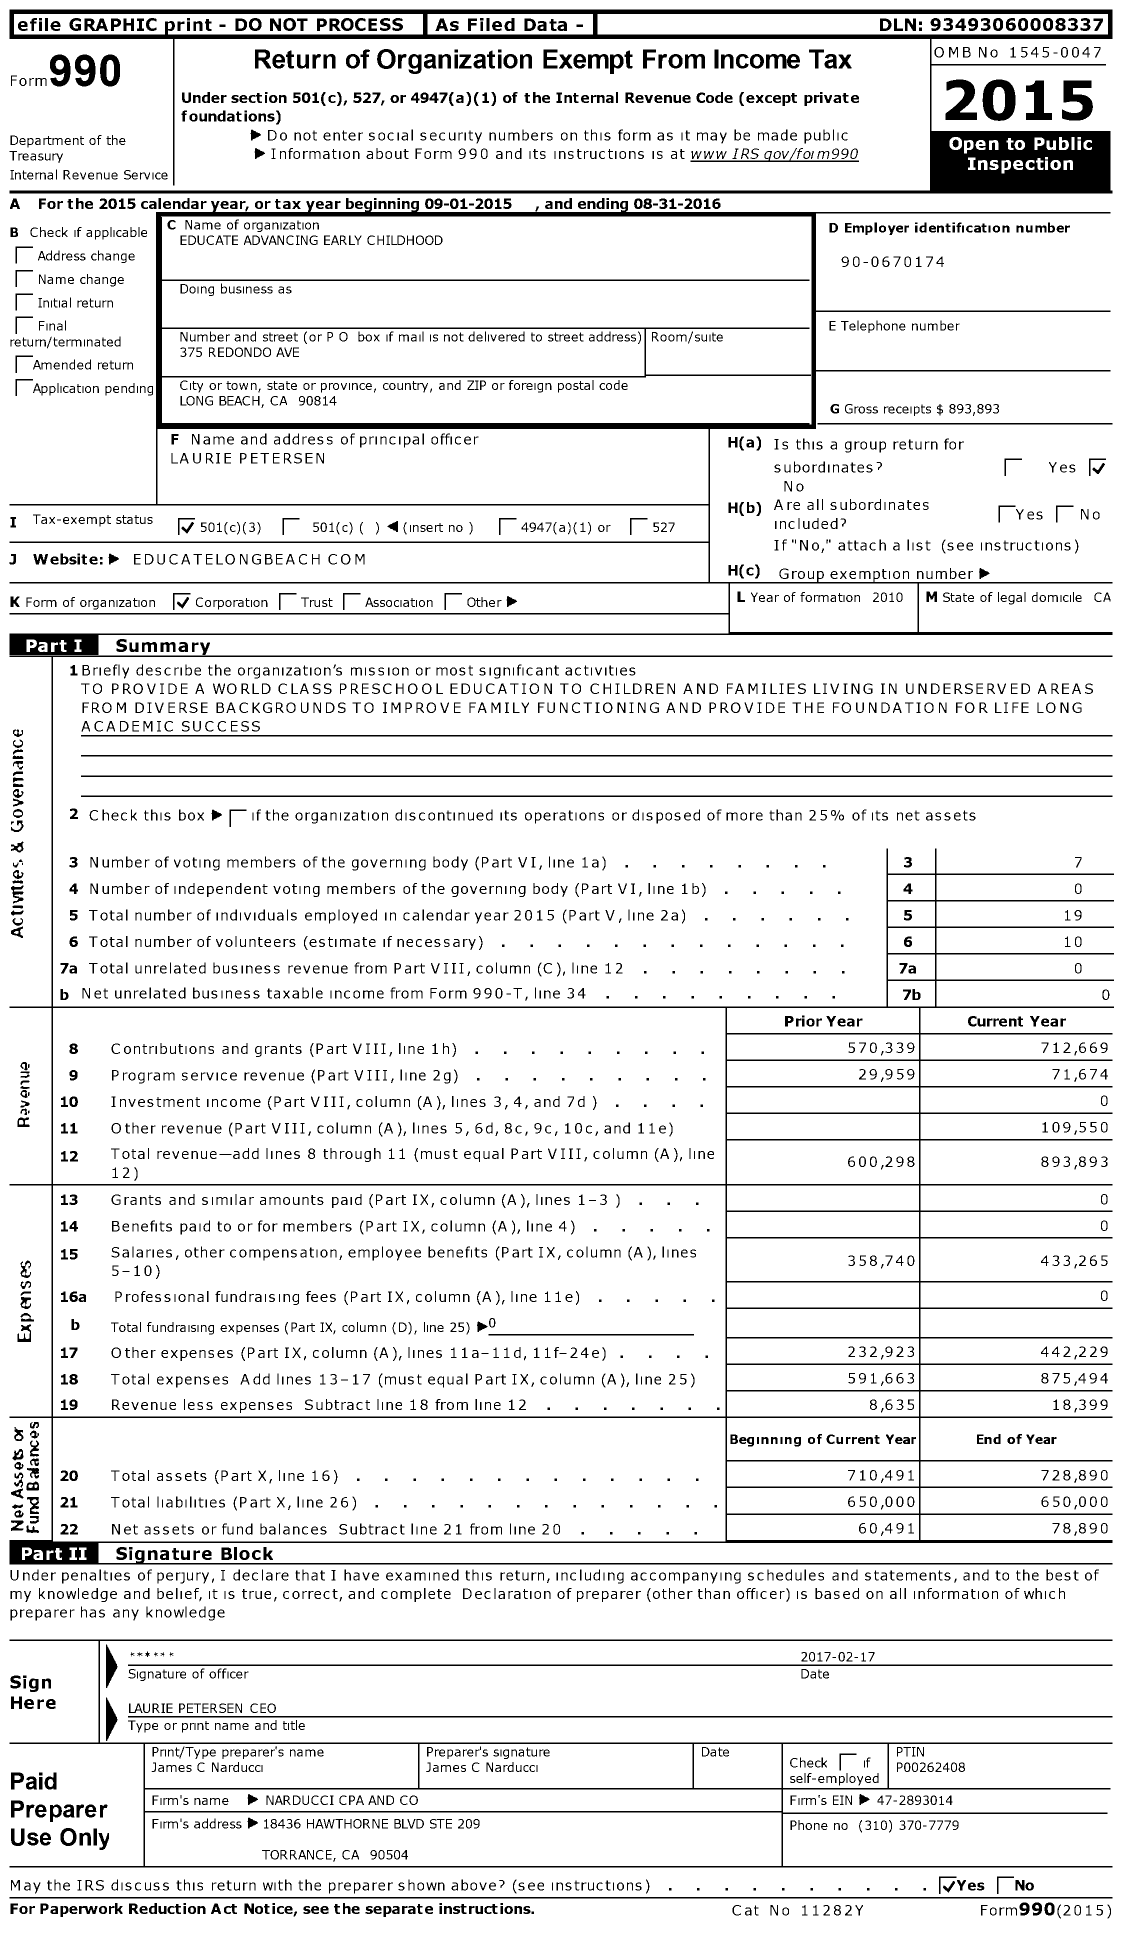 Image of first page of 2015 Form 990 for Educate Advancing Early Childhood